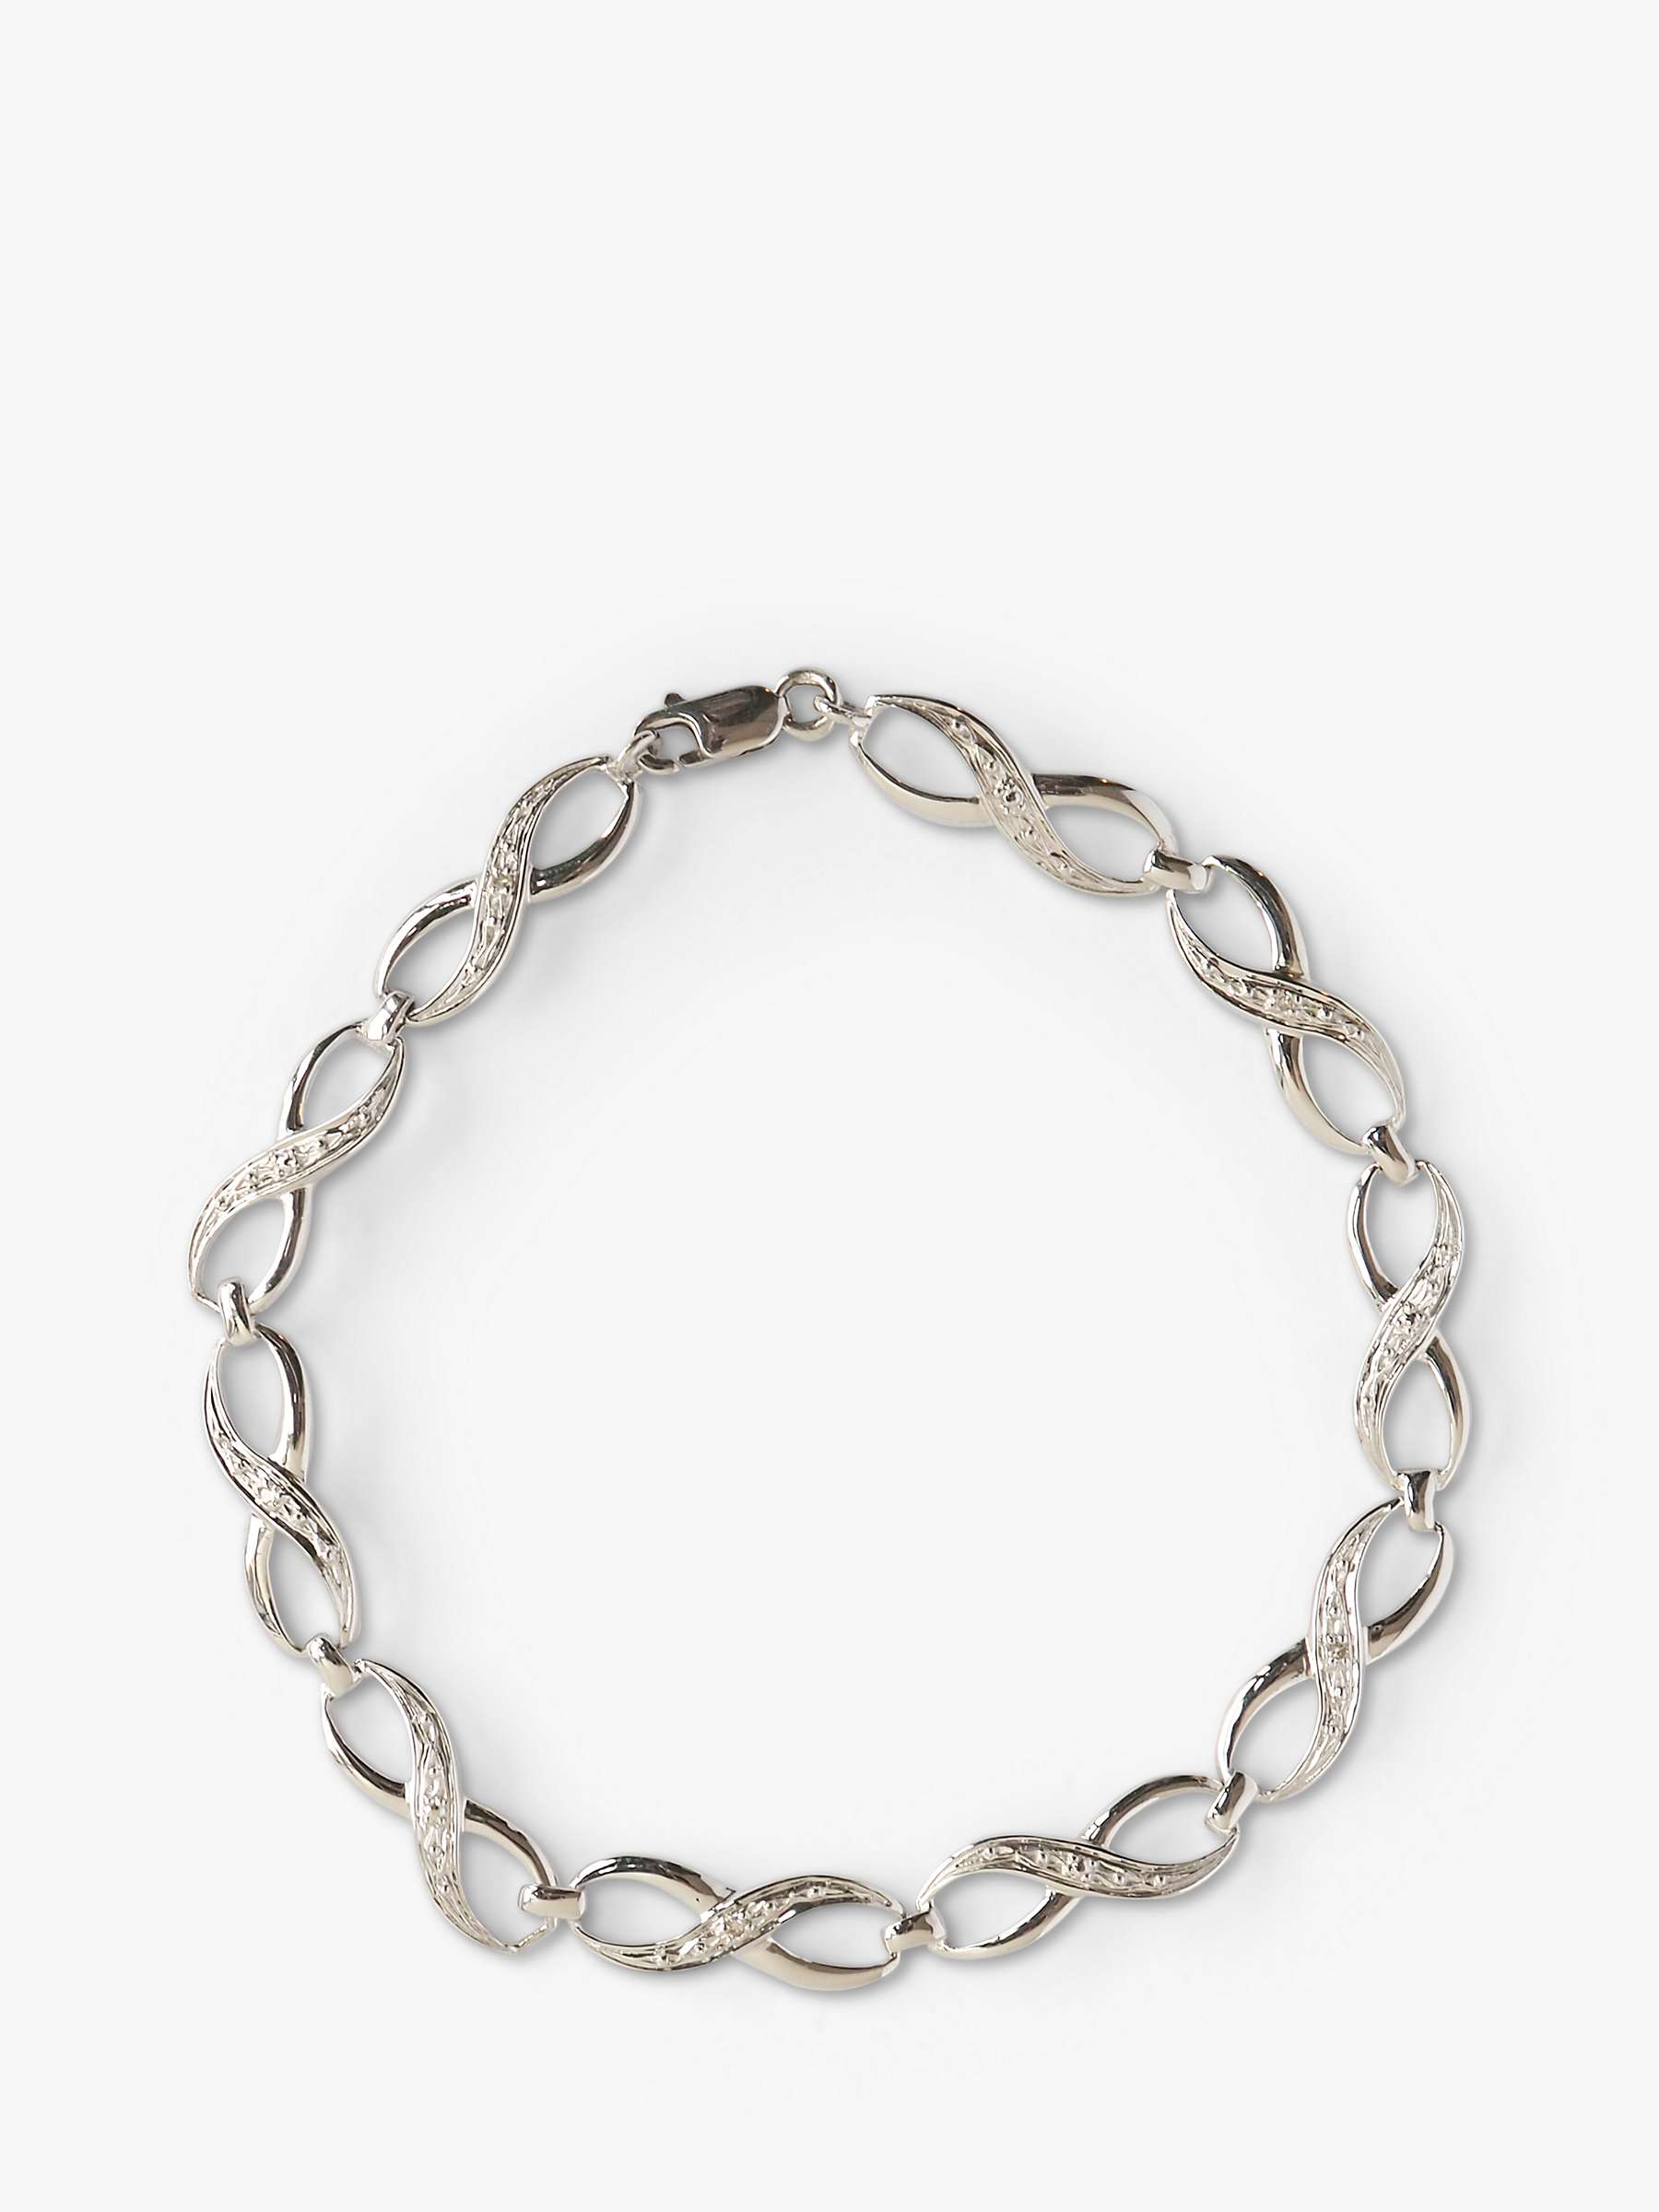 Buy L & T Heirlooms Second Hand 9ct White Gold Diamond Infinity Bracelet, Silver Online at johnlewis.com